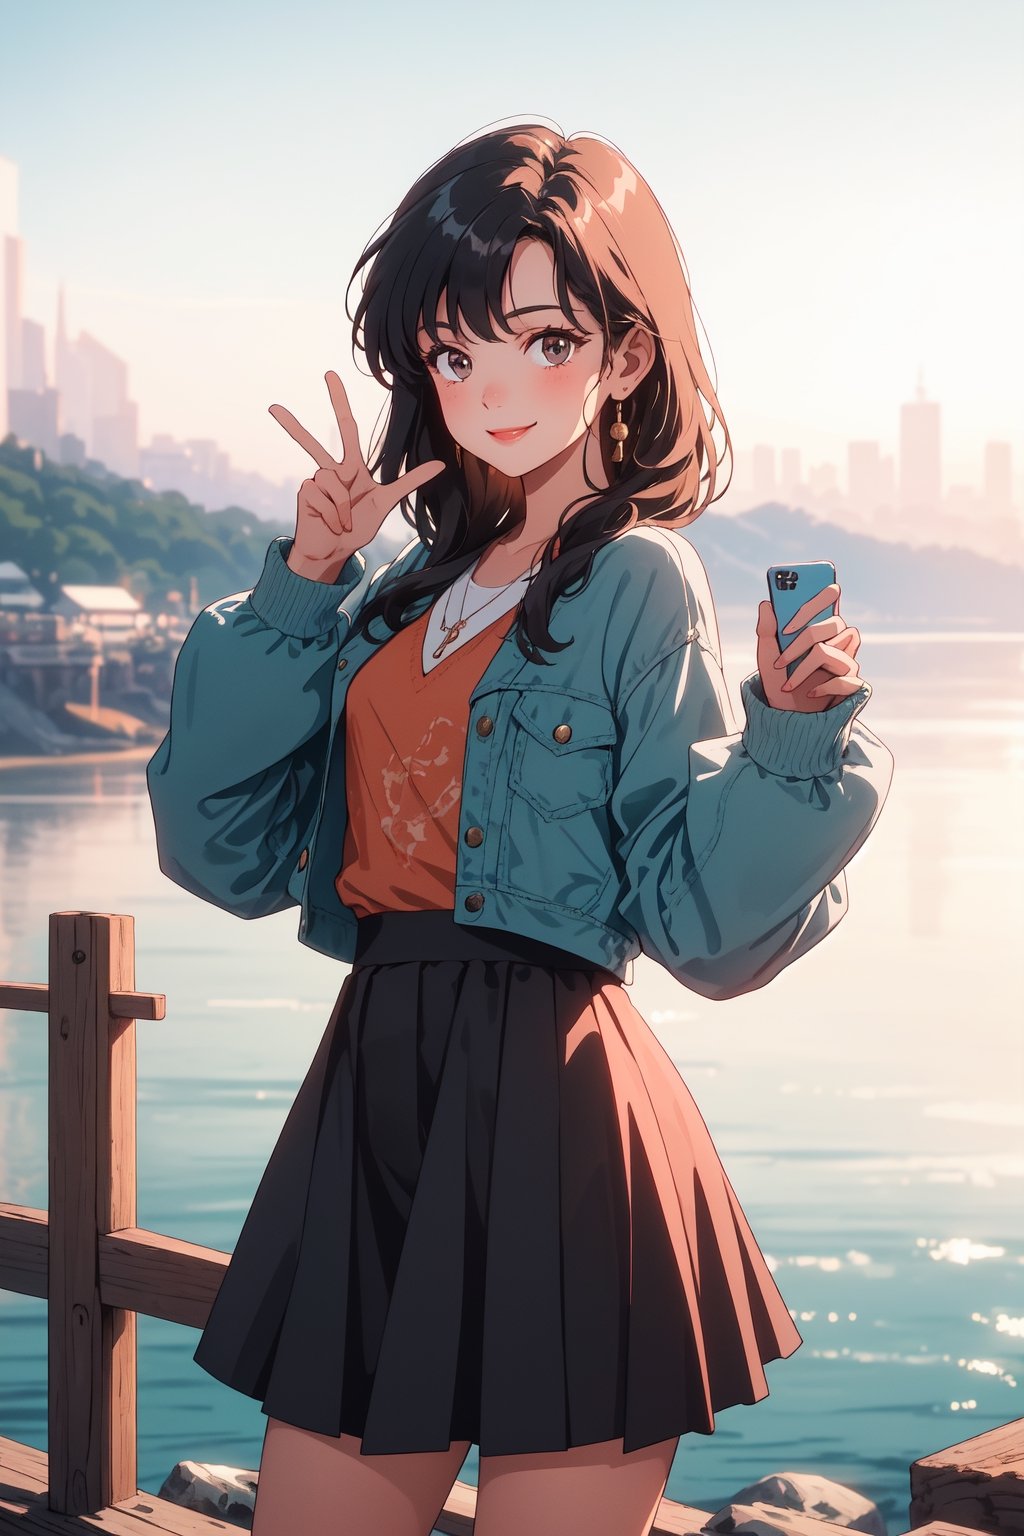 A young girl holding up her mobile phone and taking a selfie. She is smiling brightly and making a peace sign. She is wearing a cute outfit and her hair is styled in a trendy way. The background is a beautiful landscape, such as a beach, a park, or a city skyline.